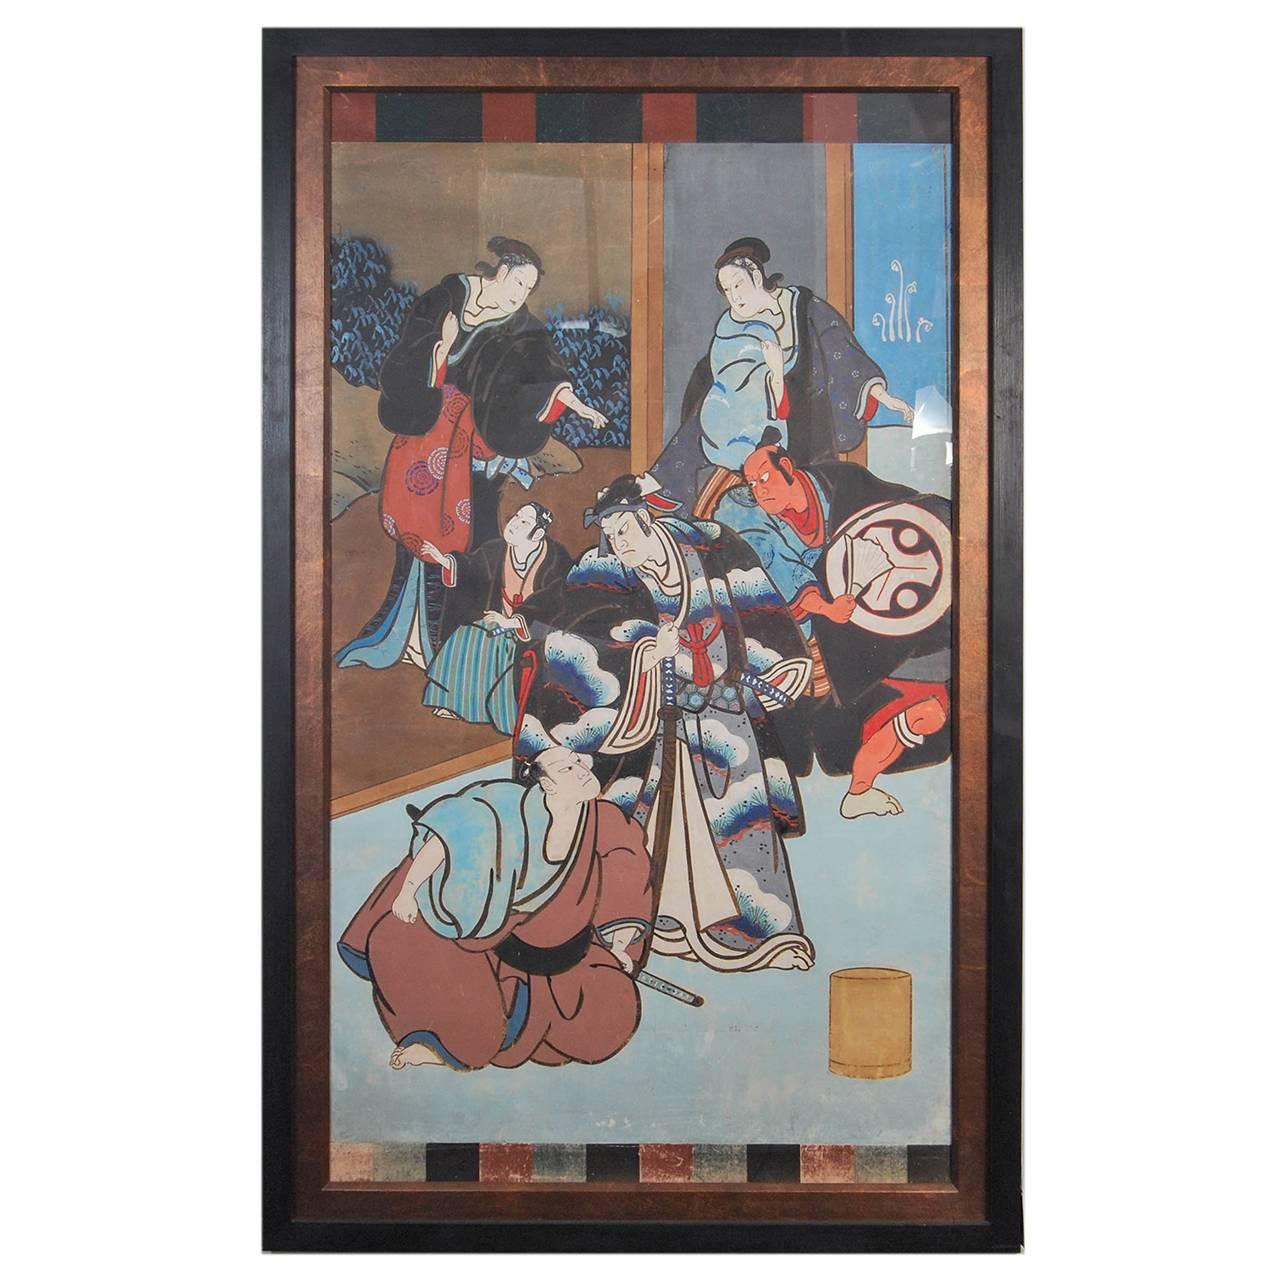 Antique Japanese Hand-Painted Kabuki Theatre Poster, 19th Century